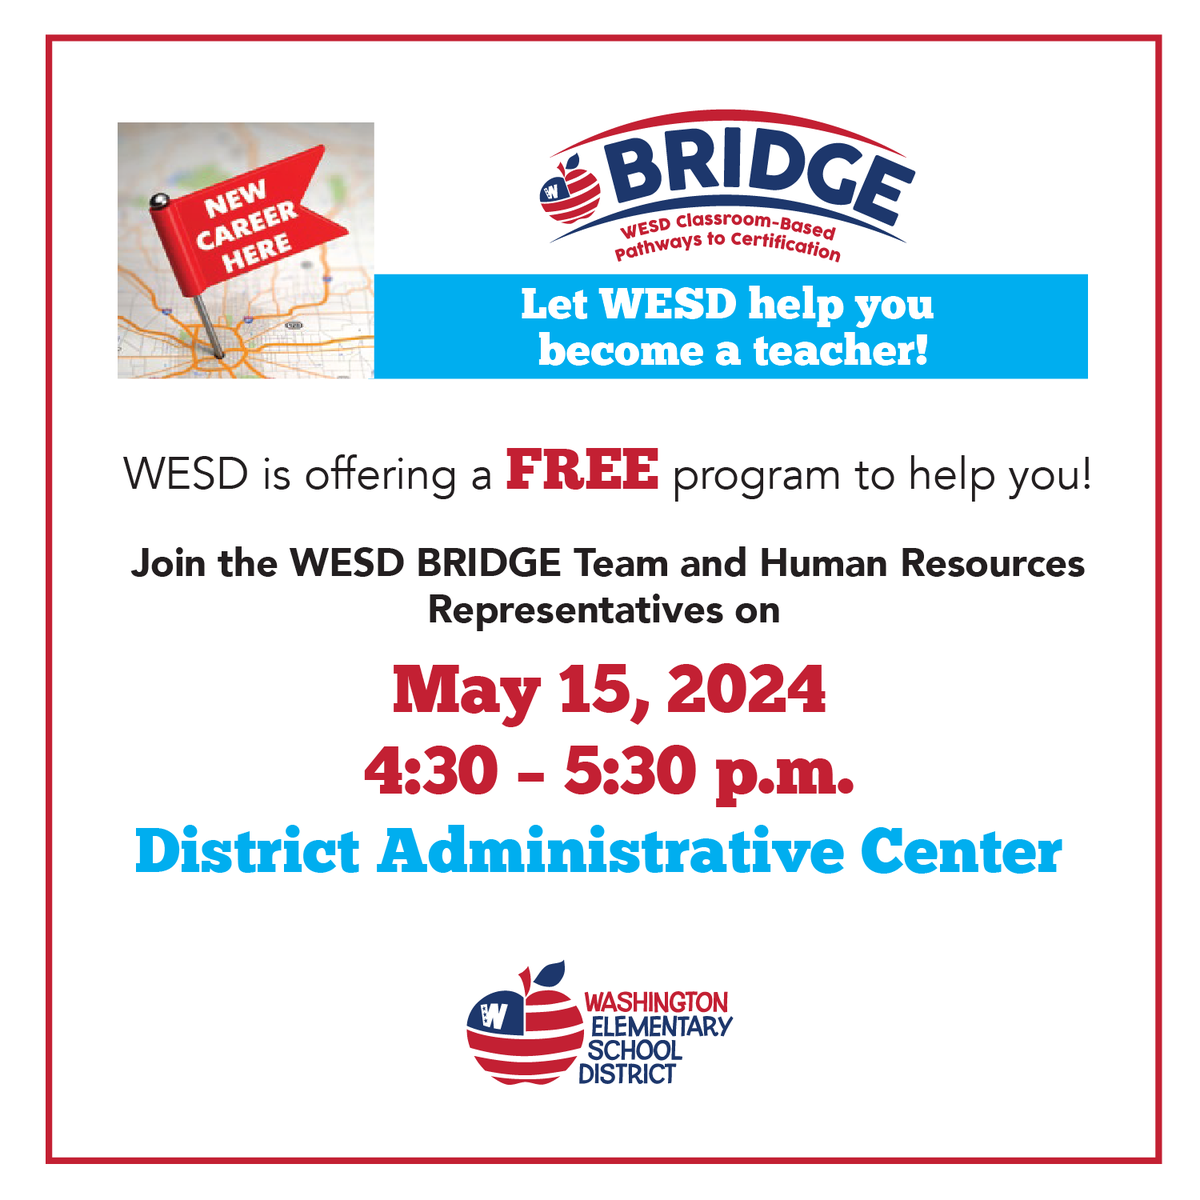 The WESD wants to help you become a teacher! Our final BRIDGE Meeting of the school year is tomorrow, May 15. During the meeting, you will learn about our free program that can help you earn your teacher certification while working as a full-time teacher! #WESDFamily